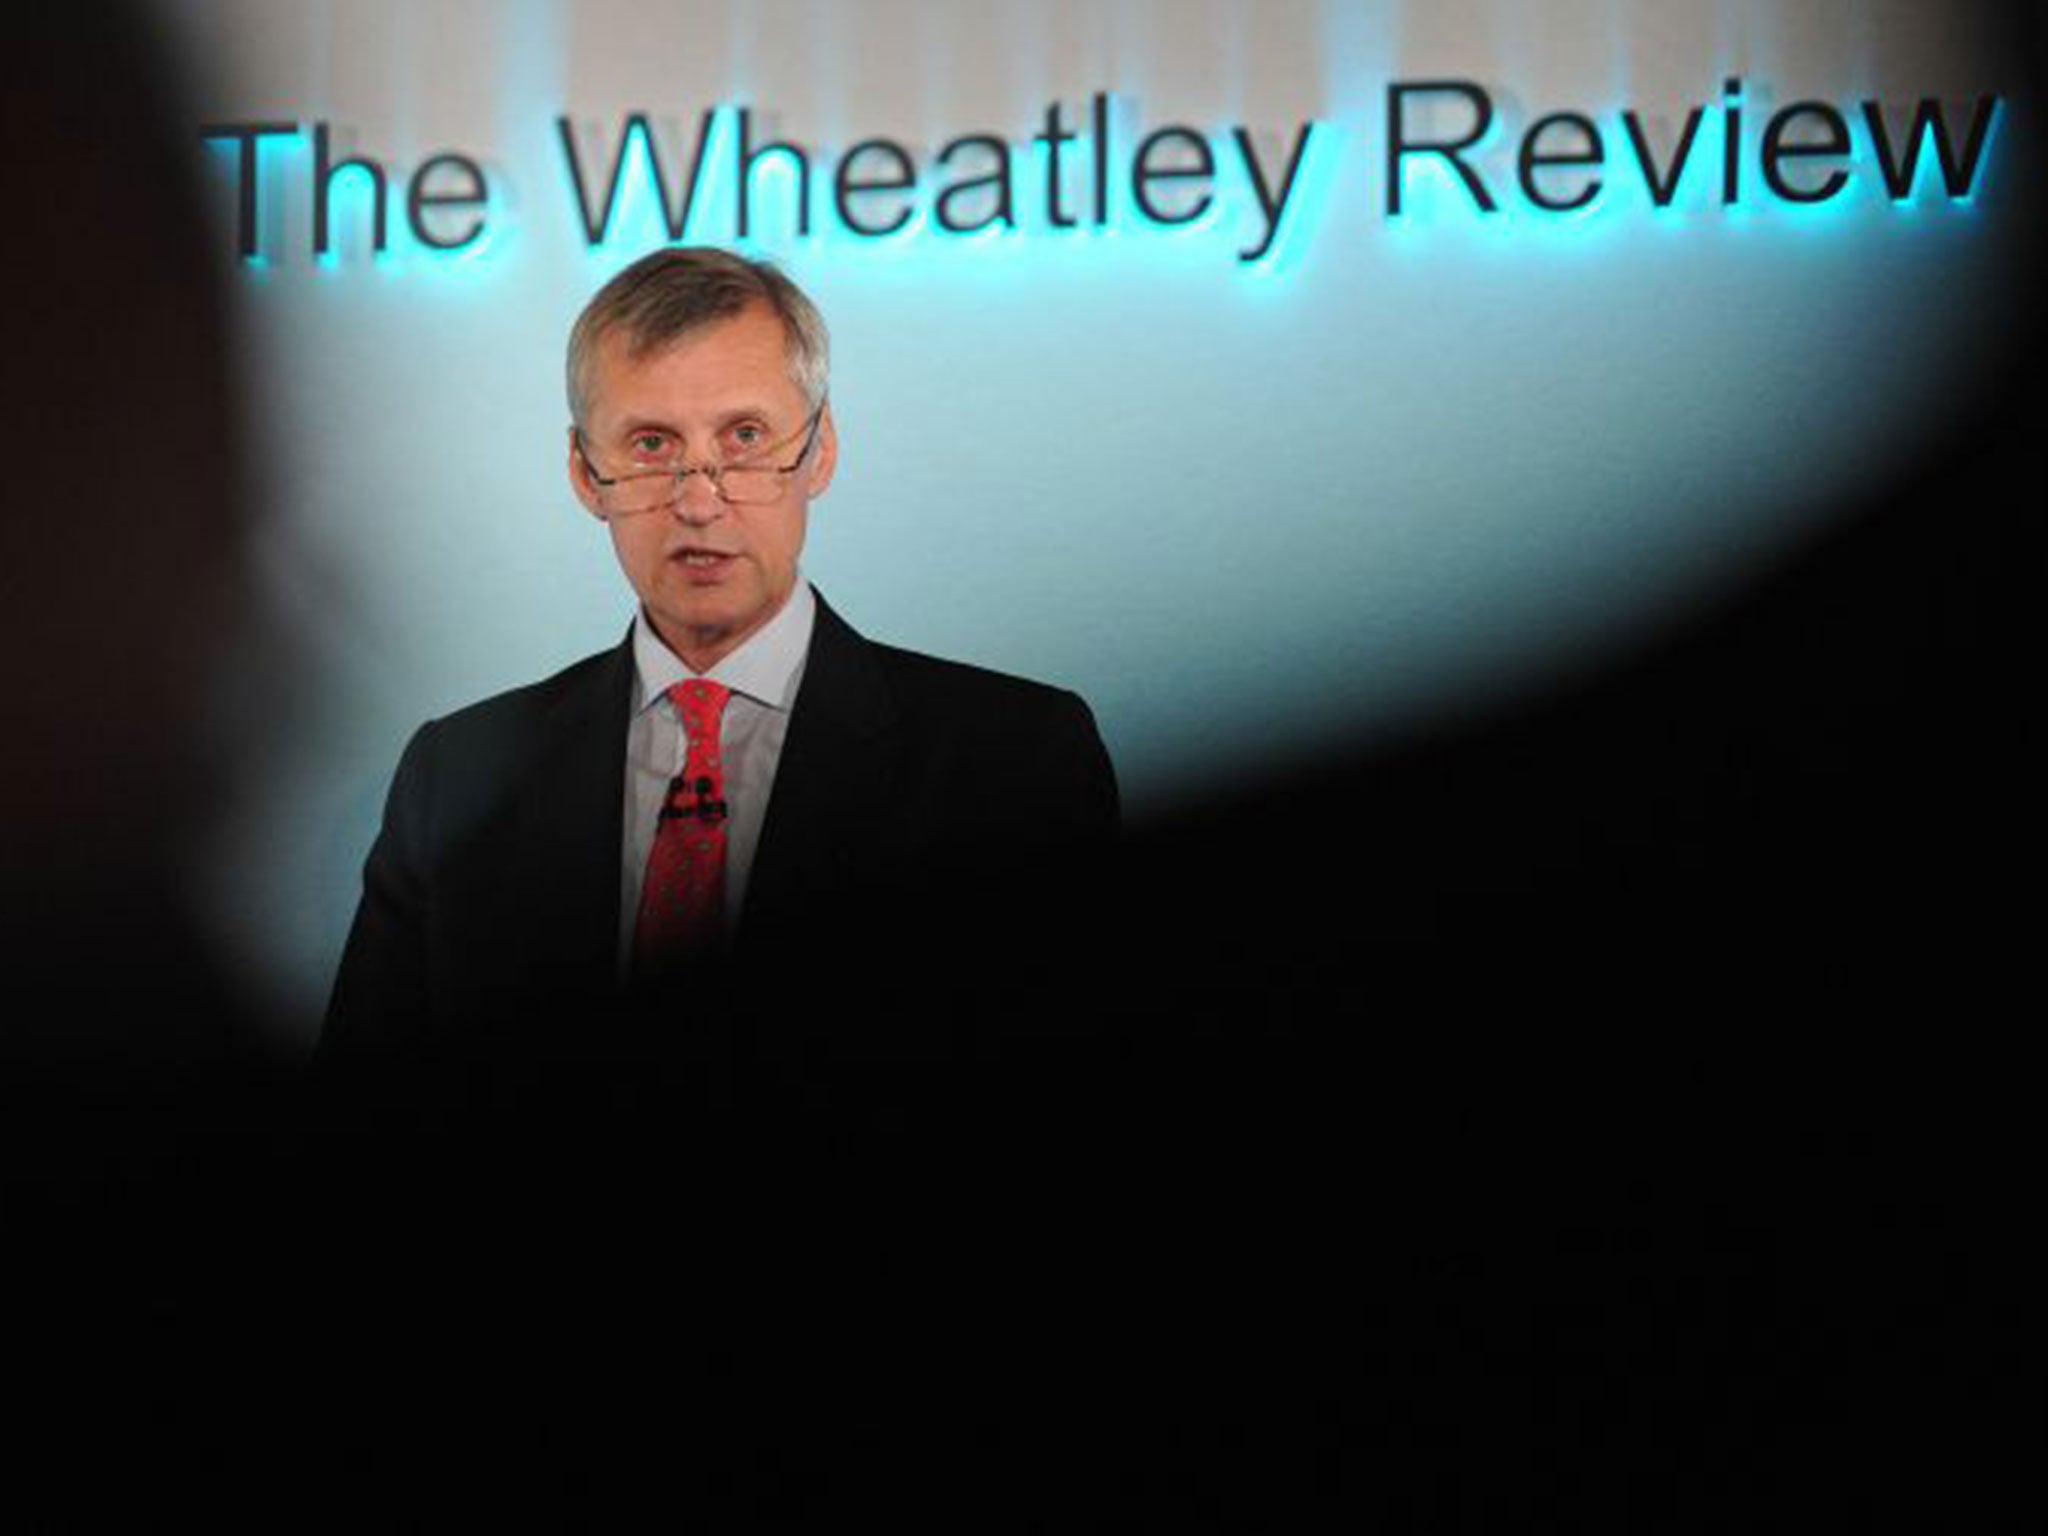 Martin Wheatley, Managing Director of the FSA and Chief Executive-designate of the Financial Conduct Authority